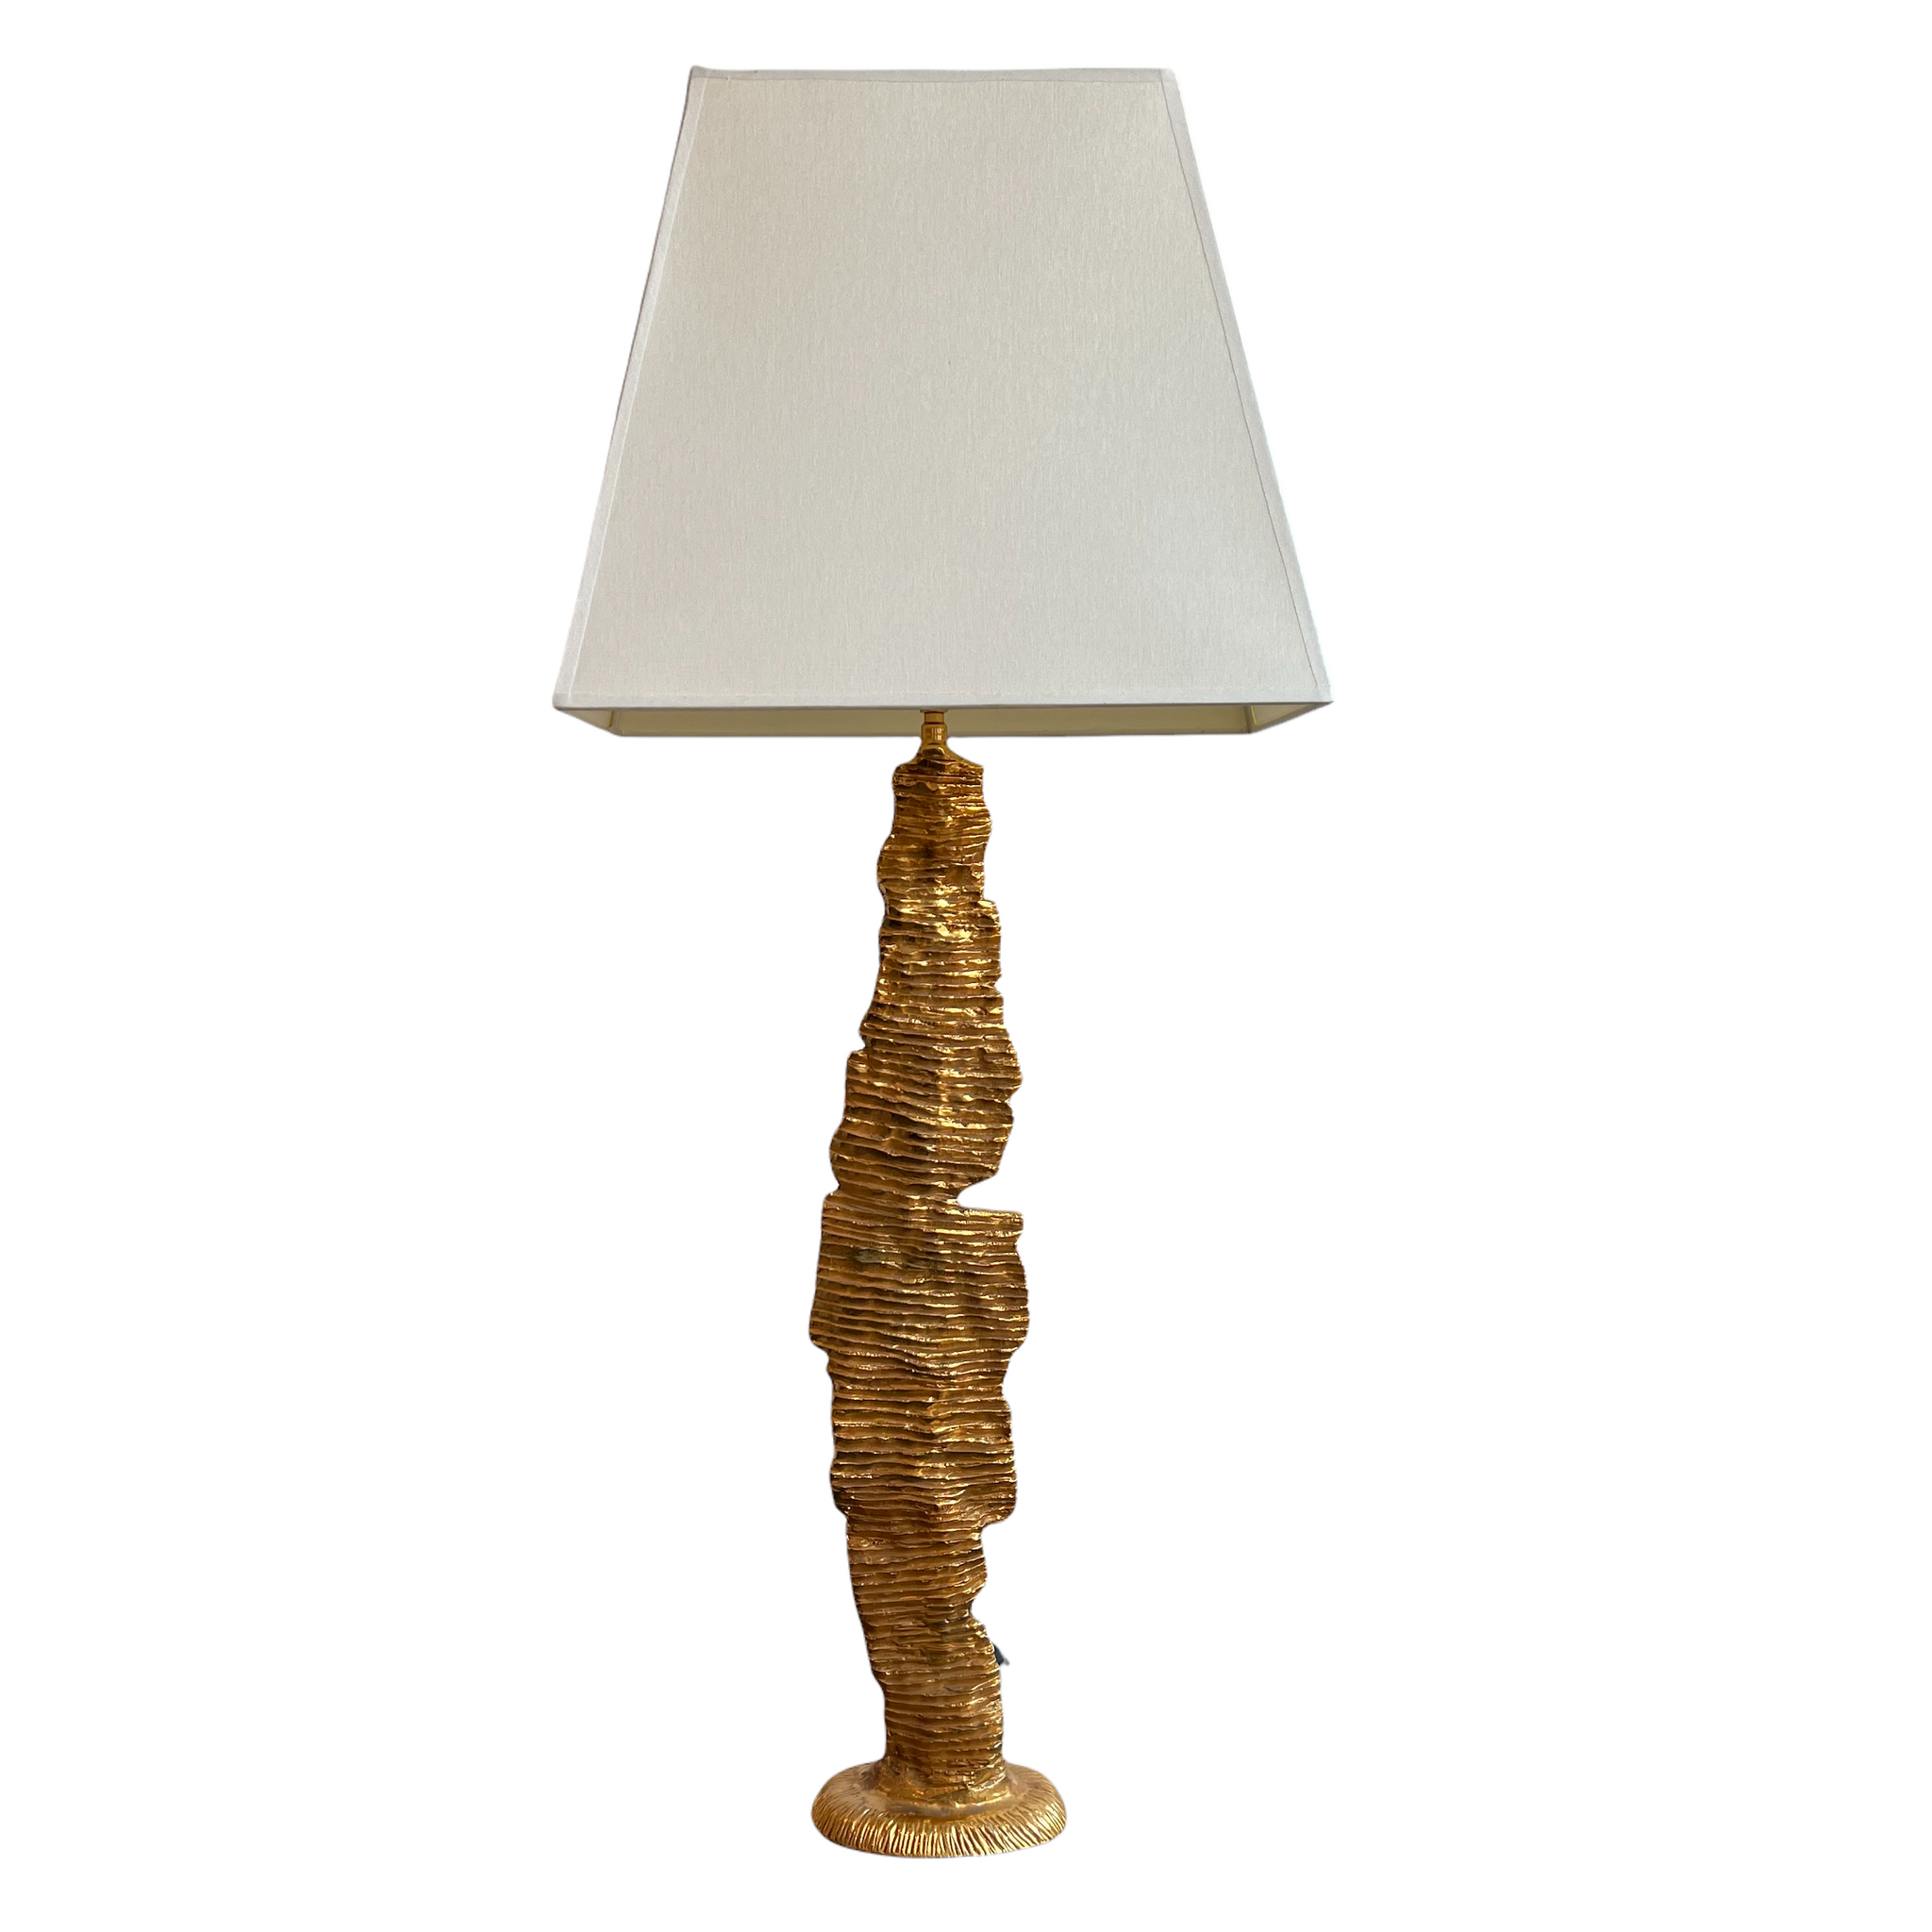 Large Gilded Zion Lamp